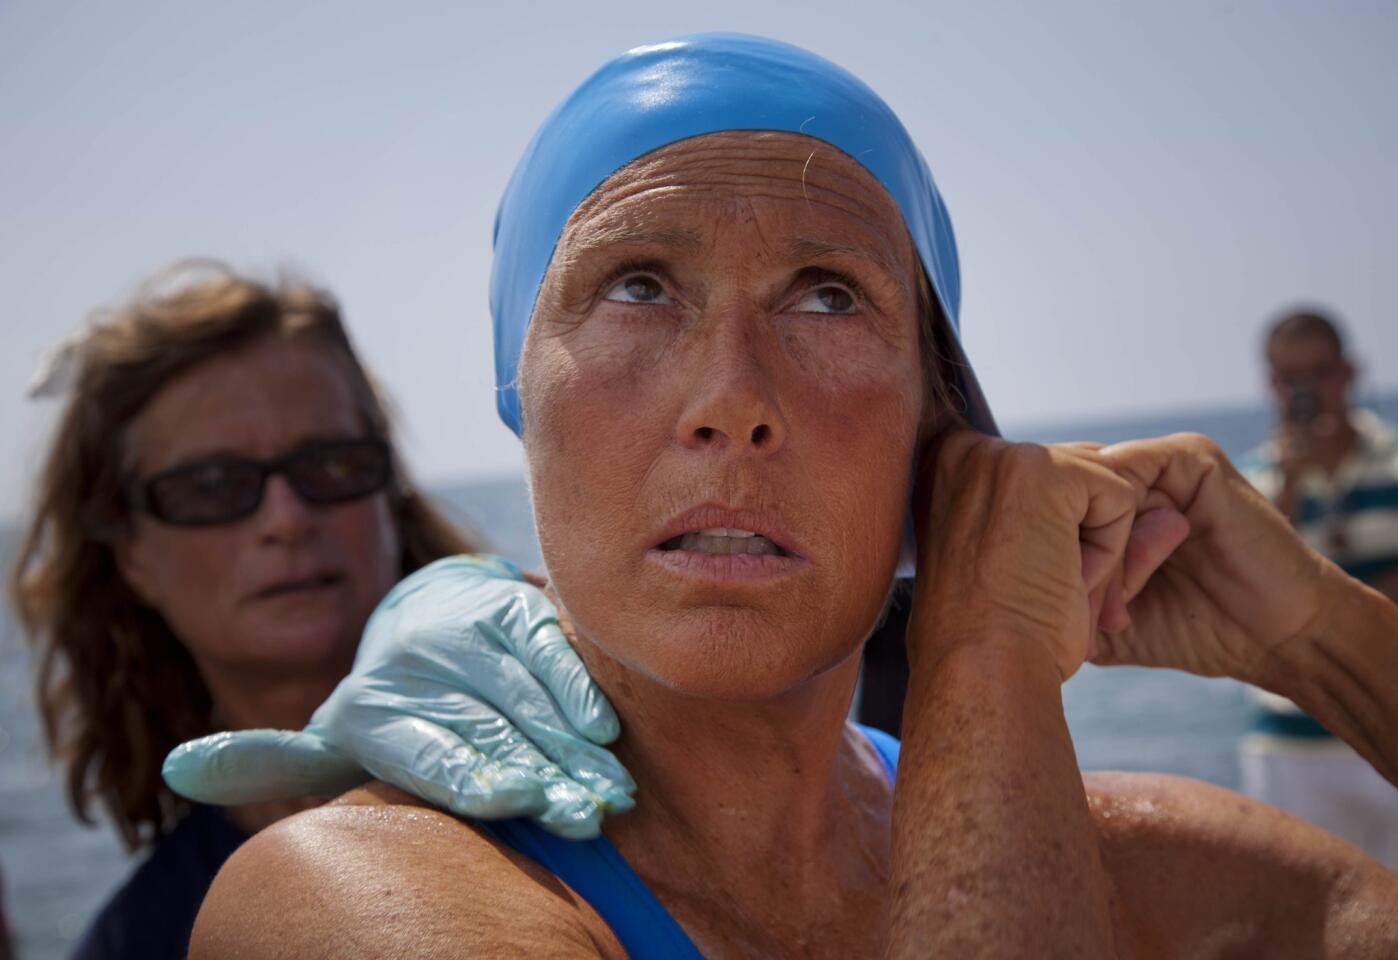 Diana Nyad adjusts her swimming cap as a woman applies a protective ointment to her skin as she prepares to start her attempt to swim to Florida from Havana, Cuba.